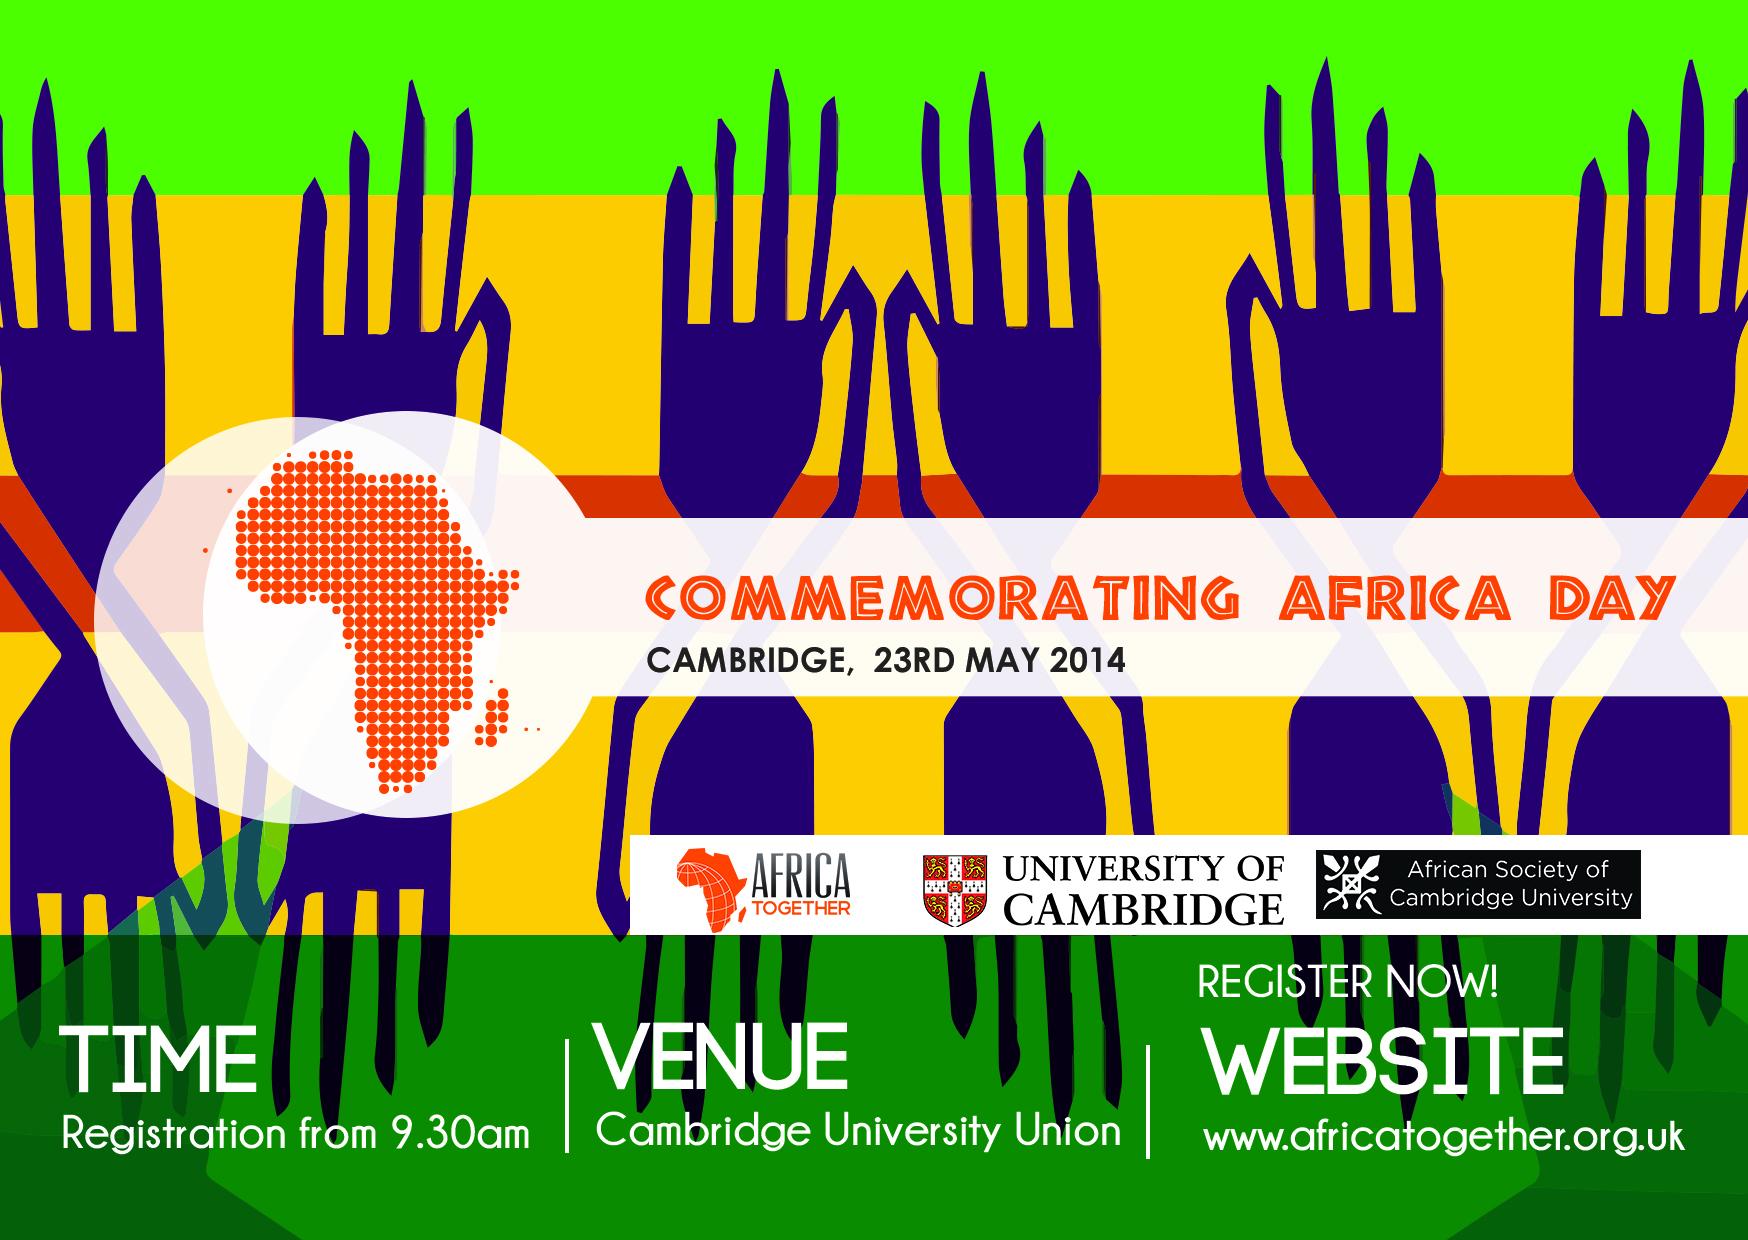 Don't forget to register for 'Africa Together' this week  Friday 23 May